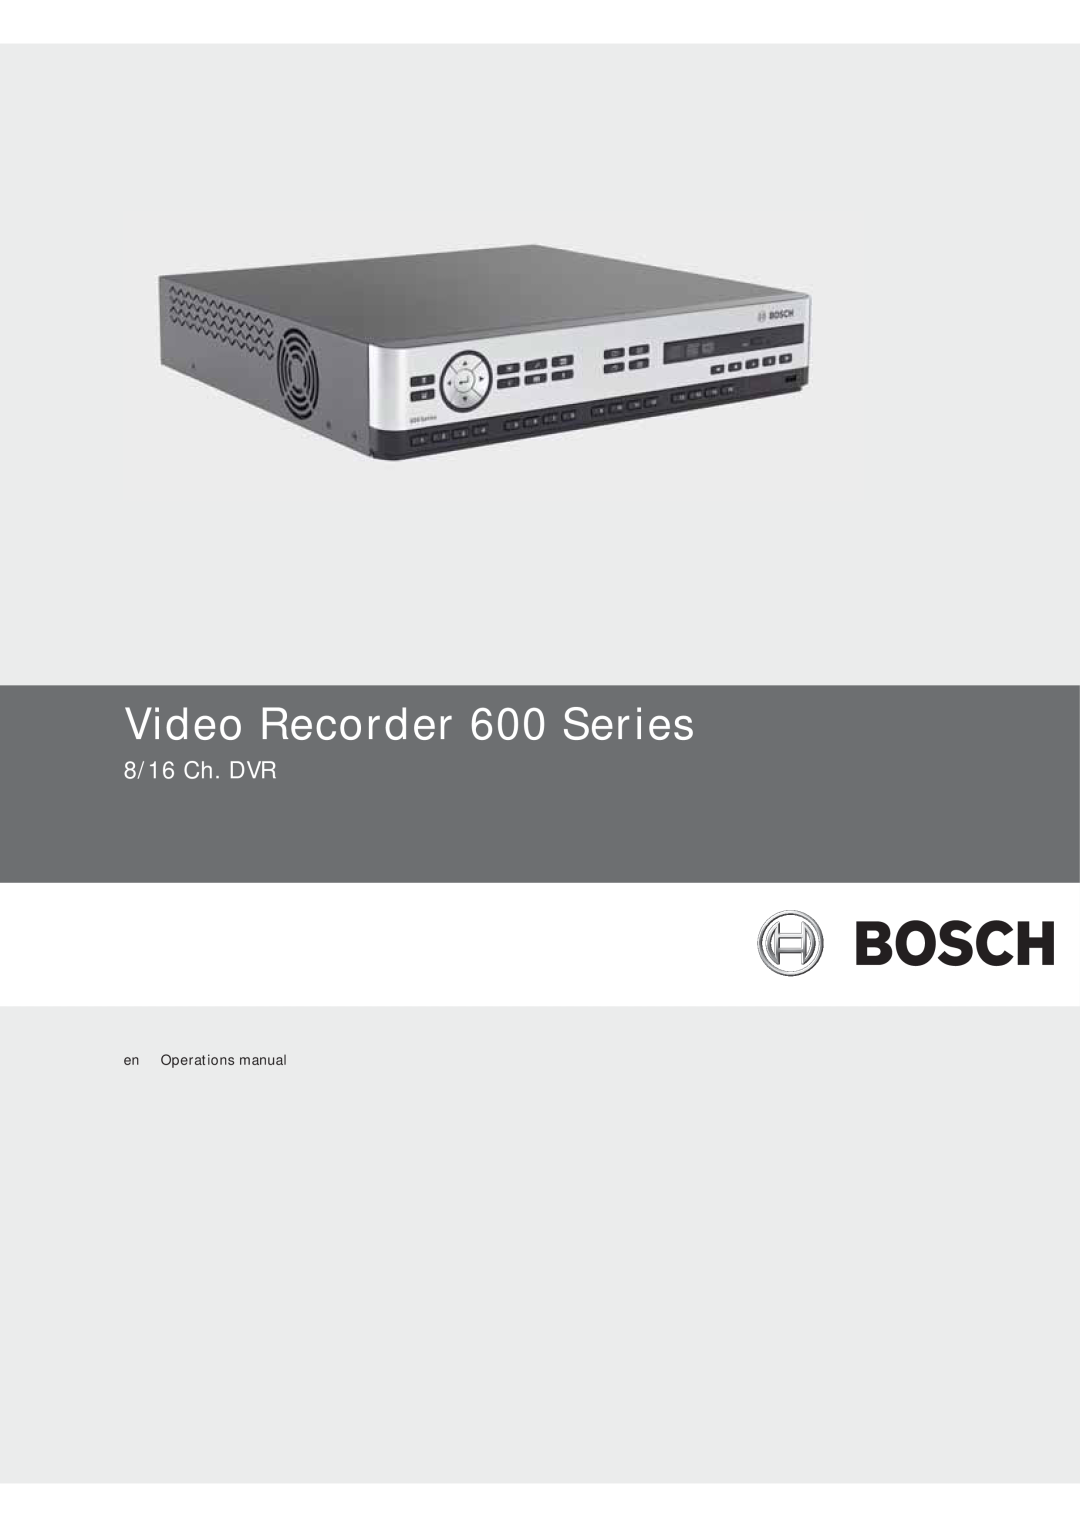 Bosch Appliances manual Video MIC Series 550 Infrared Camera, System overview, Twin integrated IR illuminators 